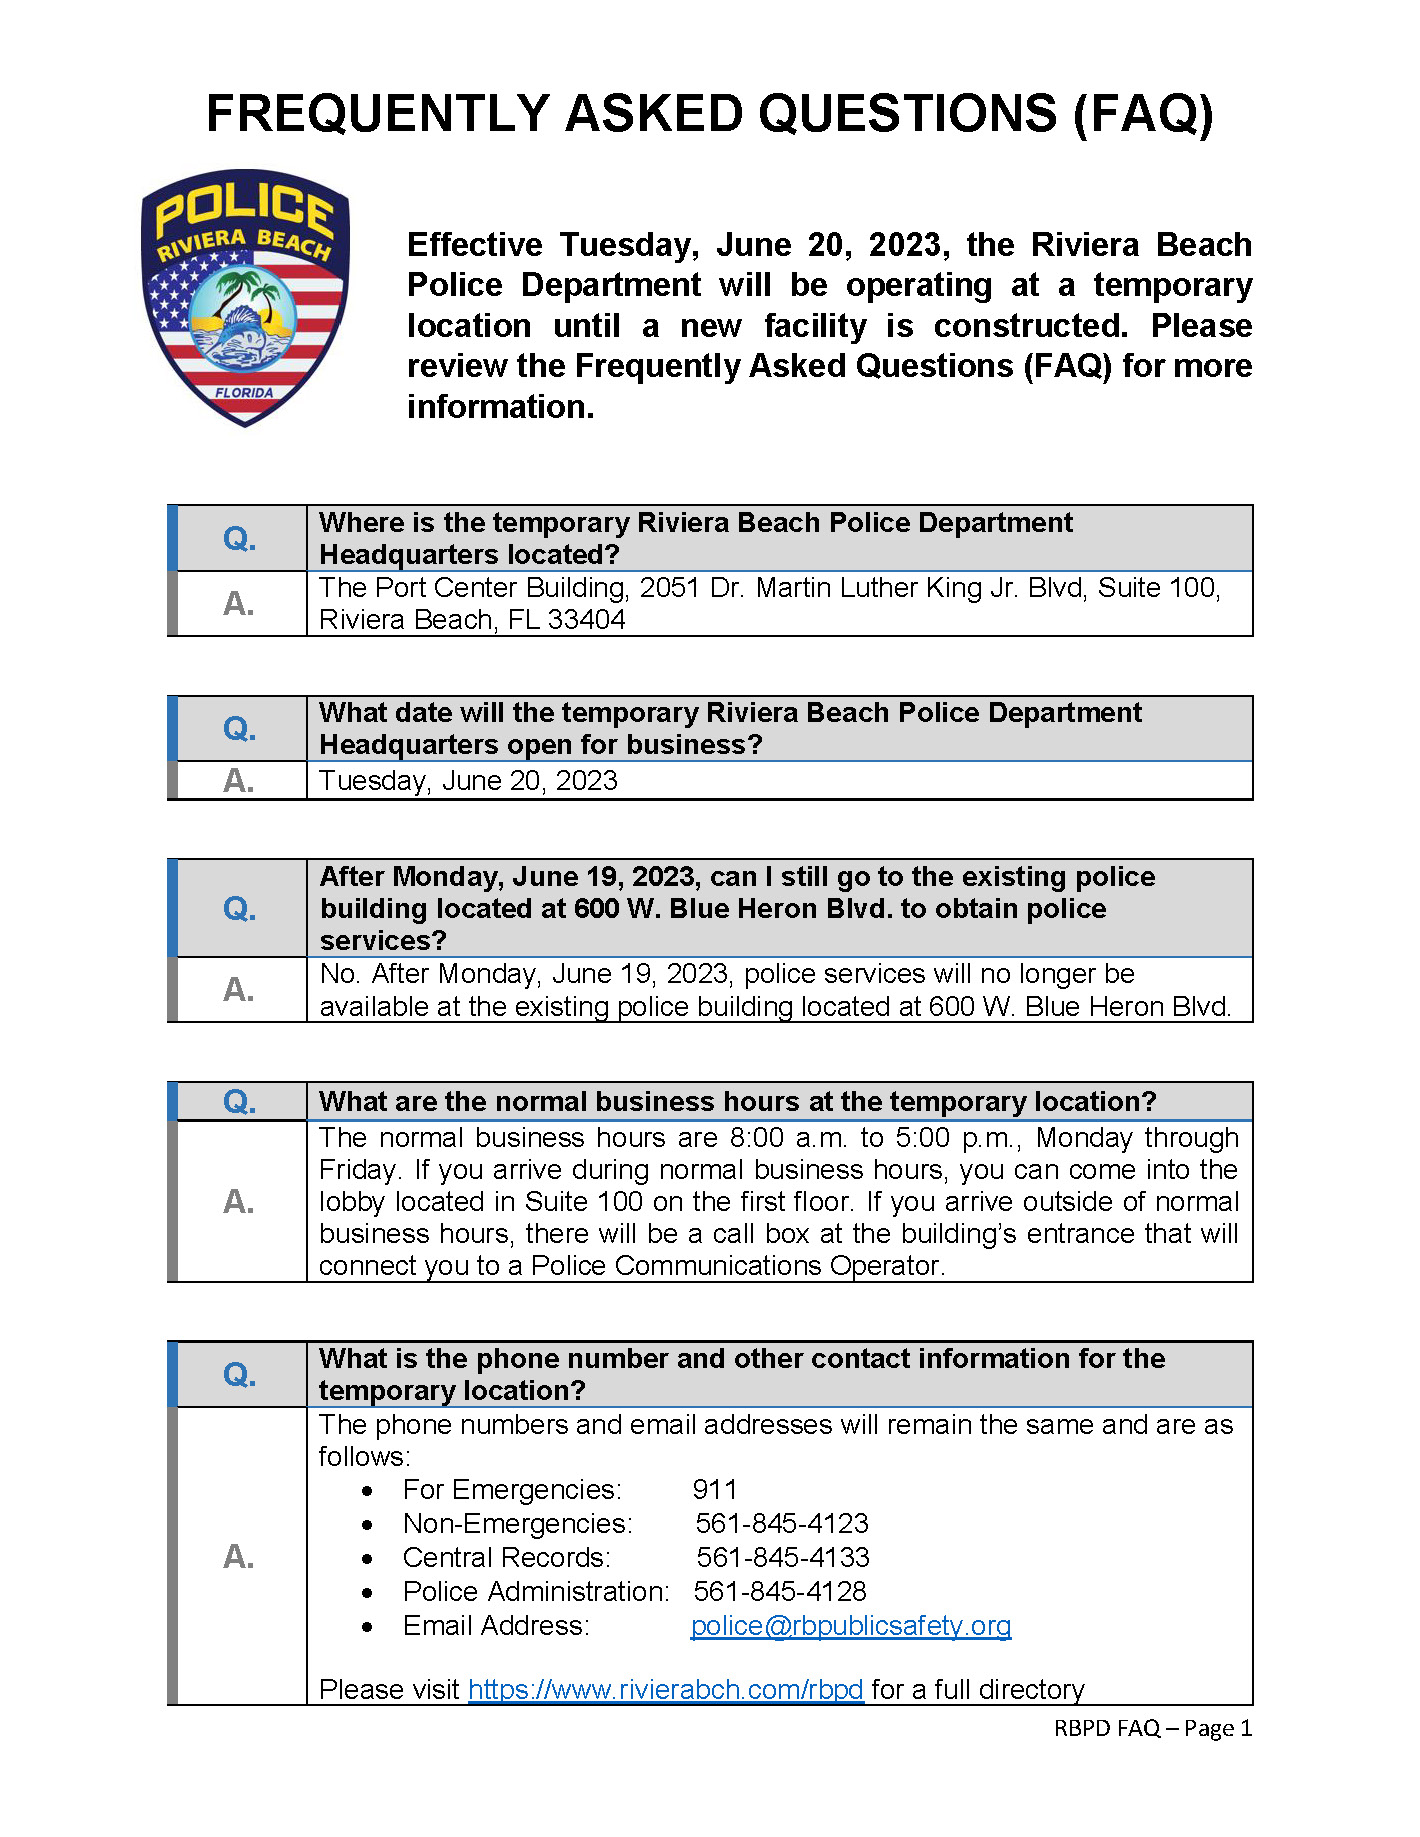 FOR IMMEDIATE RELEASE: THE RIVIERA BEACH POLICE DEPARTMENT WILL BEGIN OPERATING AT A TEMPORARY LOCATION RIVIERA BEACH, FL (June 5, 2023) – In a move designed to better serve the community, the Riviera Beach Police Department will be operating from a temporary location starting Tuesday, June 20, 2023. The Riviera Beach Police Department staff and personnel will be stationed at the Port Center Building on 2051 Dr. Martin Luther King Jr. Blvd. It is critical to state that this move will not interfere with the Police Department’s daily duties to serve Riviera Beach, and it will not impact the safety of our residents and visitors. The normal business hours at the Port Center are 8:00 a.m. to 5:00 p.m., Monday through Friday. If you arrive during normal business hours, you can come into the lobby located in Suite 100 on the first floor. If you arrive outside of normal business hours, there will be a call box at the building’s entrance that will connect you to a Police Communications Operator. All police services that will be available at the Port Center will include, but are not limited to: Central Records, Police Administration, Patrol Operations, Investigations, Traffic Unit, and Victim Services. We want to reassure to the public that this was a well thought out and timely planning process. The existing police headquarters was built in 1978 and is over 45 years old. The facility no longer meets the demands of Police Department staff, and it is no longer feasible to repair and maintain the facility. The City Council approved Resolution 055-23 to authorize staff to move forward with the design, procurement, and construction of a new police headquarters building. The City executed a 4-year lease at a temporary location.